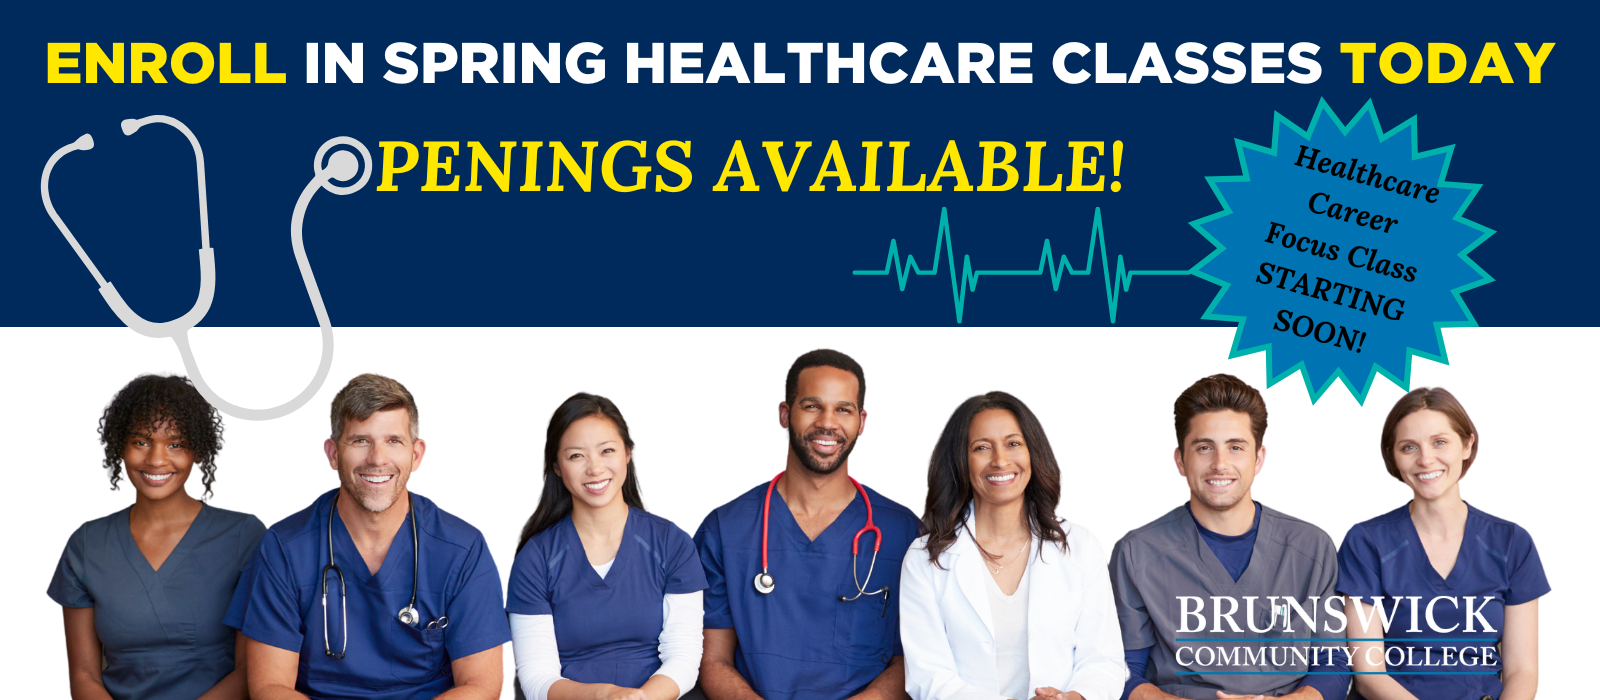 Banner in support of spring healthcare classes